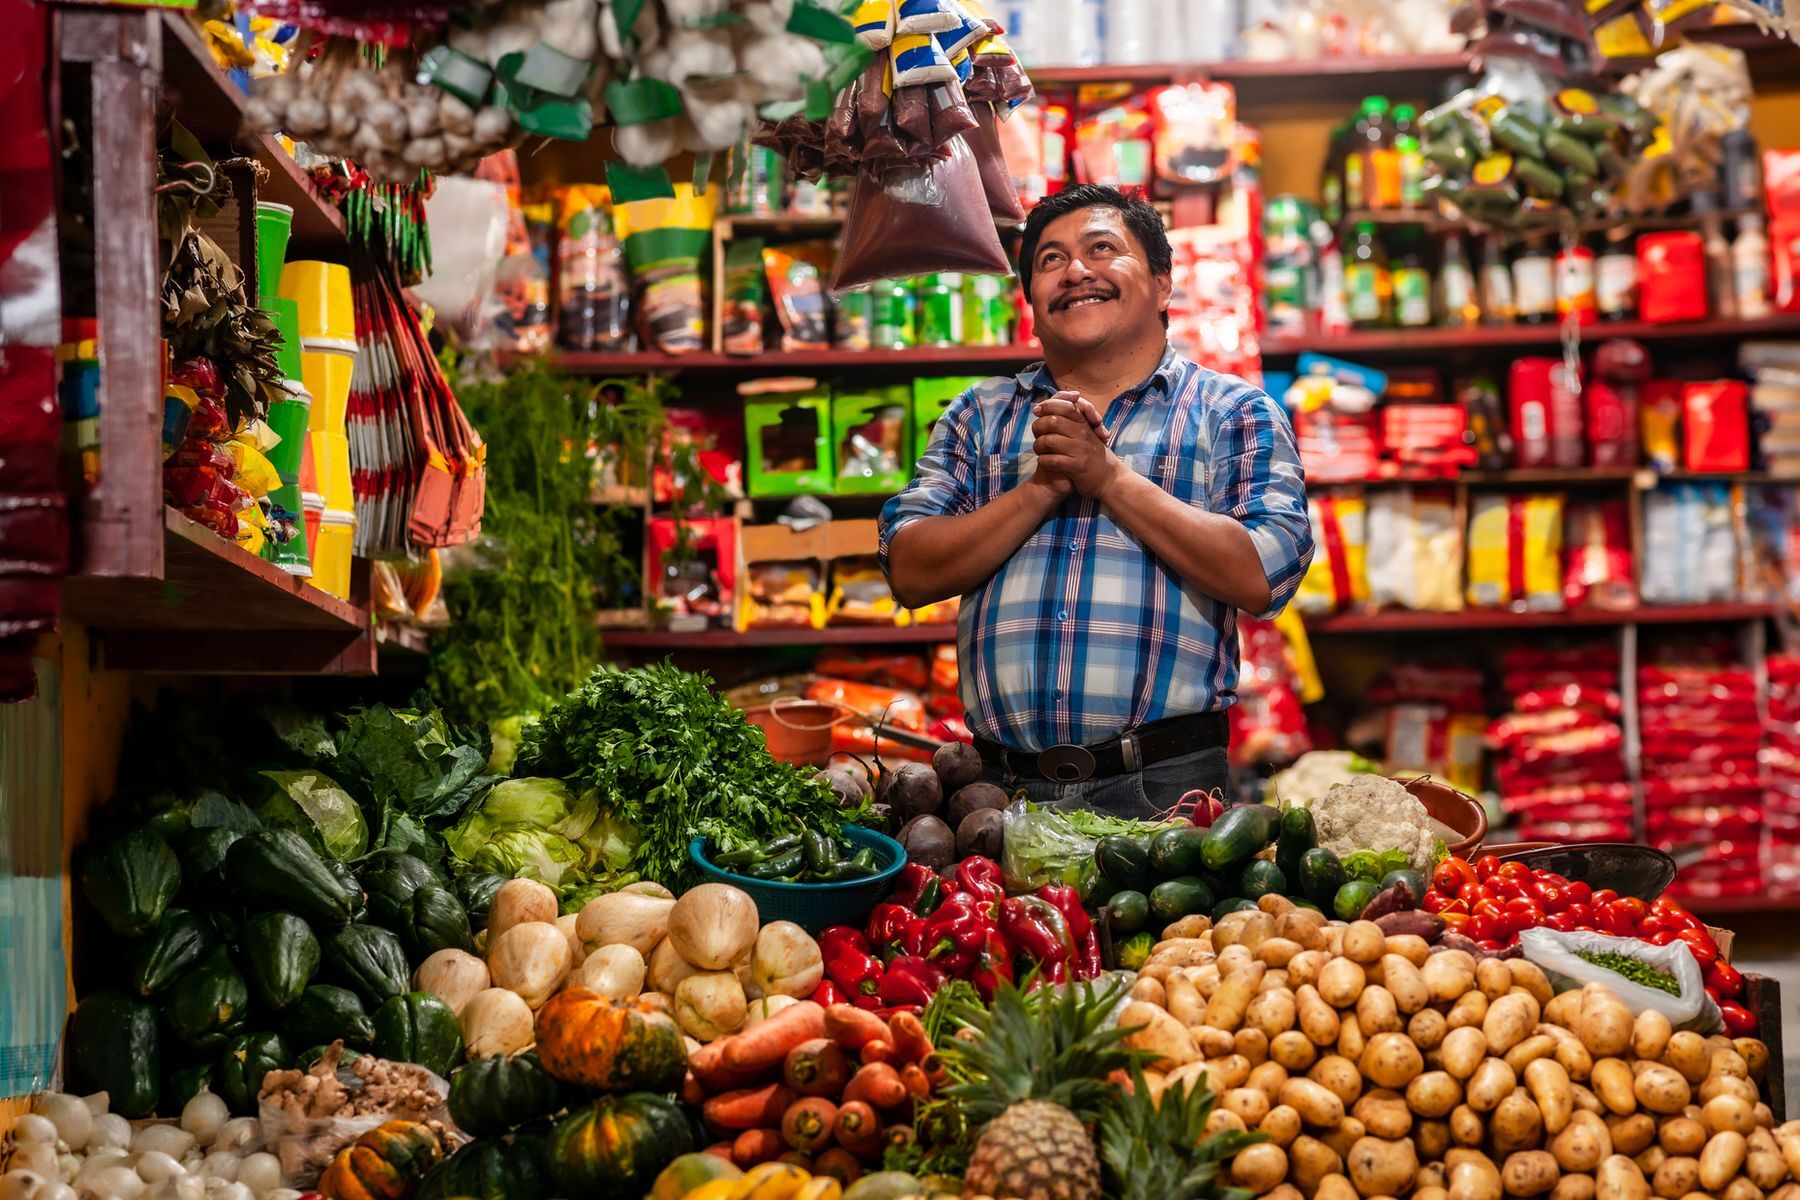 <p>Monthly minimum: $222</p><p>The largest capital city in Central America has a reputation for having <a href="https://www.viaventure.com/traditional-easter-food-guatemala/" title="https://www.viaventure.com/traditional-easter-food-guatemala/">delicious and affordable street food</a>, including tostadas, enchiladas, and chuchitos, a type of Guatemalan tamale. But the great food deals don’t end there. Groceries in Guatemala City are also reasonably priced, thanks in large part to its affordable produce, including 0.25 kg (0.5 lb.) of bananas for just $0.32. The monthly recommended minimum amount of money for food per person is <a href="https://www.numbeo.com/food-prices/in/Guatemala-City?displayCurrency=USD" title="https://www.numbeo.com/food-prices/in/Guatemala-City?displayCurrency=USD">1,717.10 quetzals</a>, or US$222. </p>